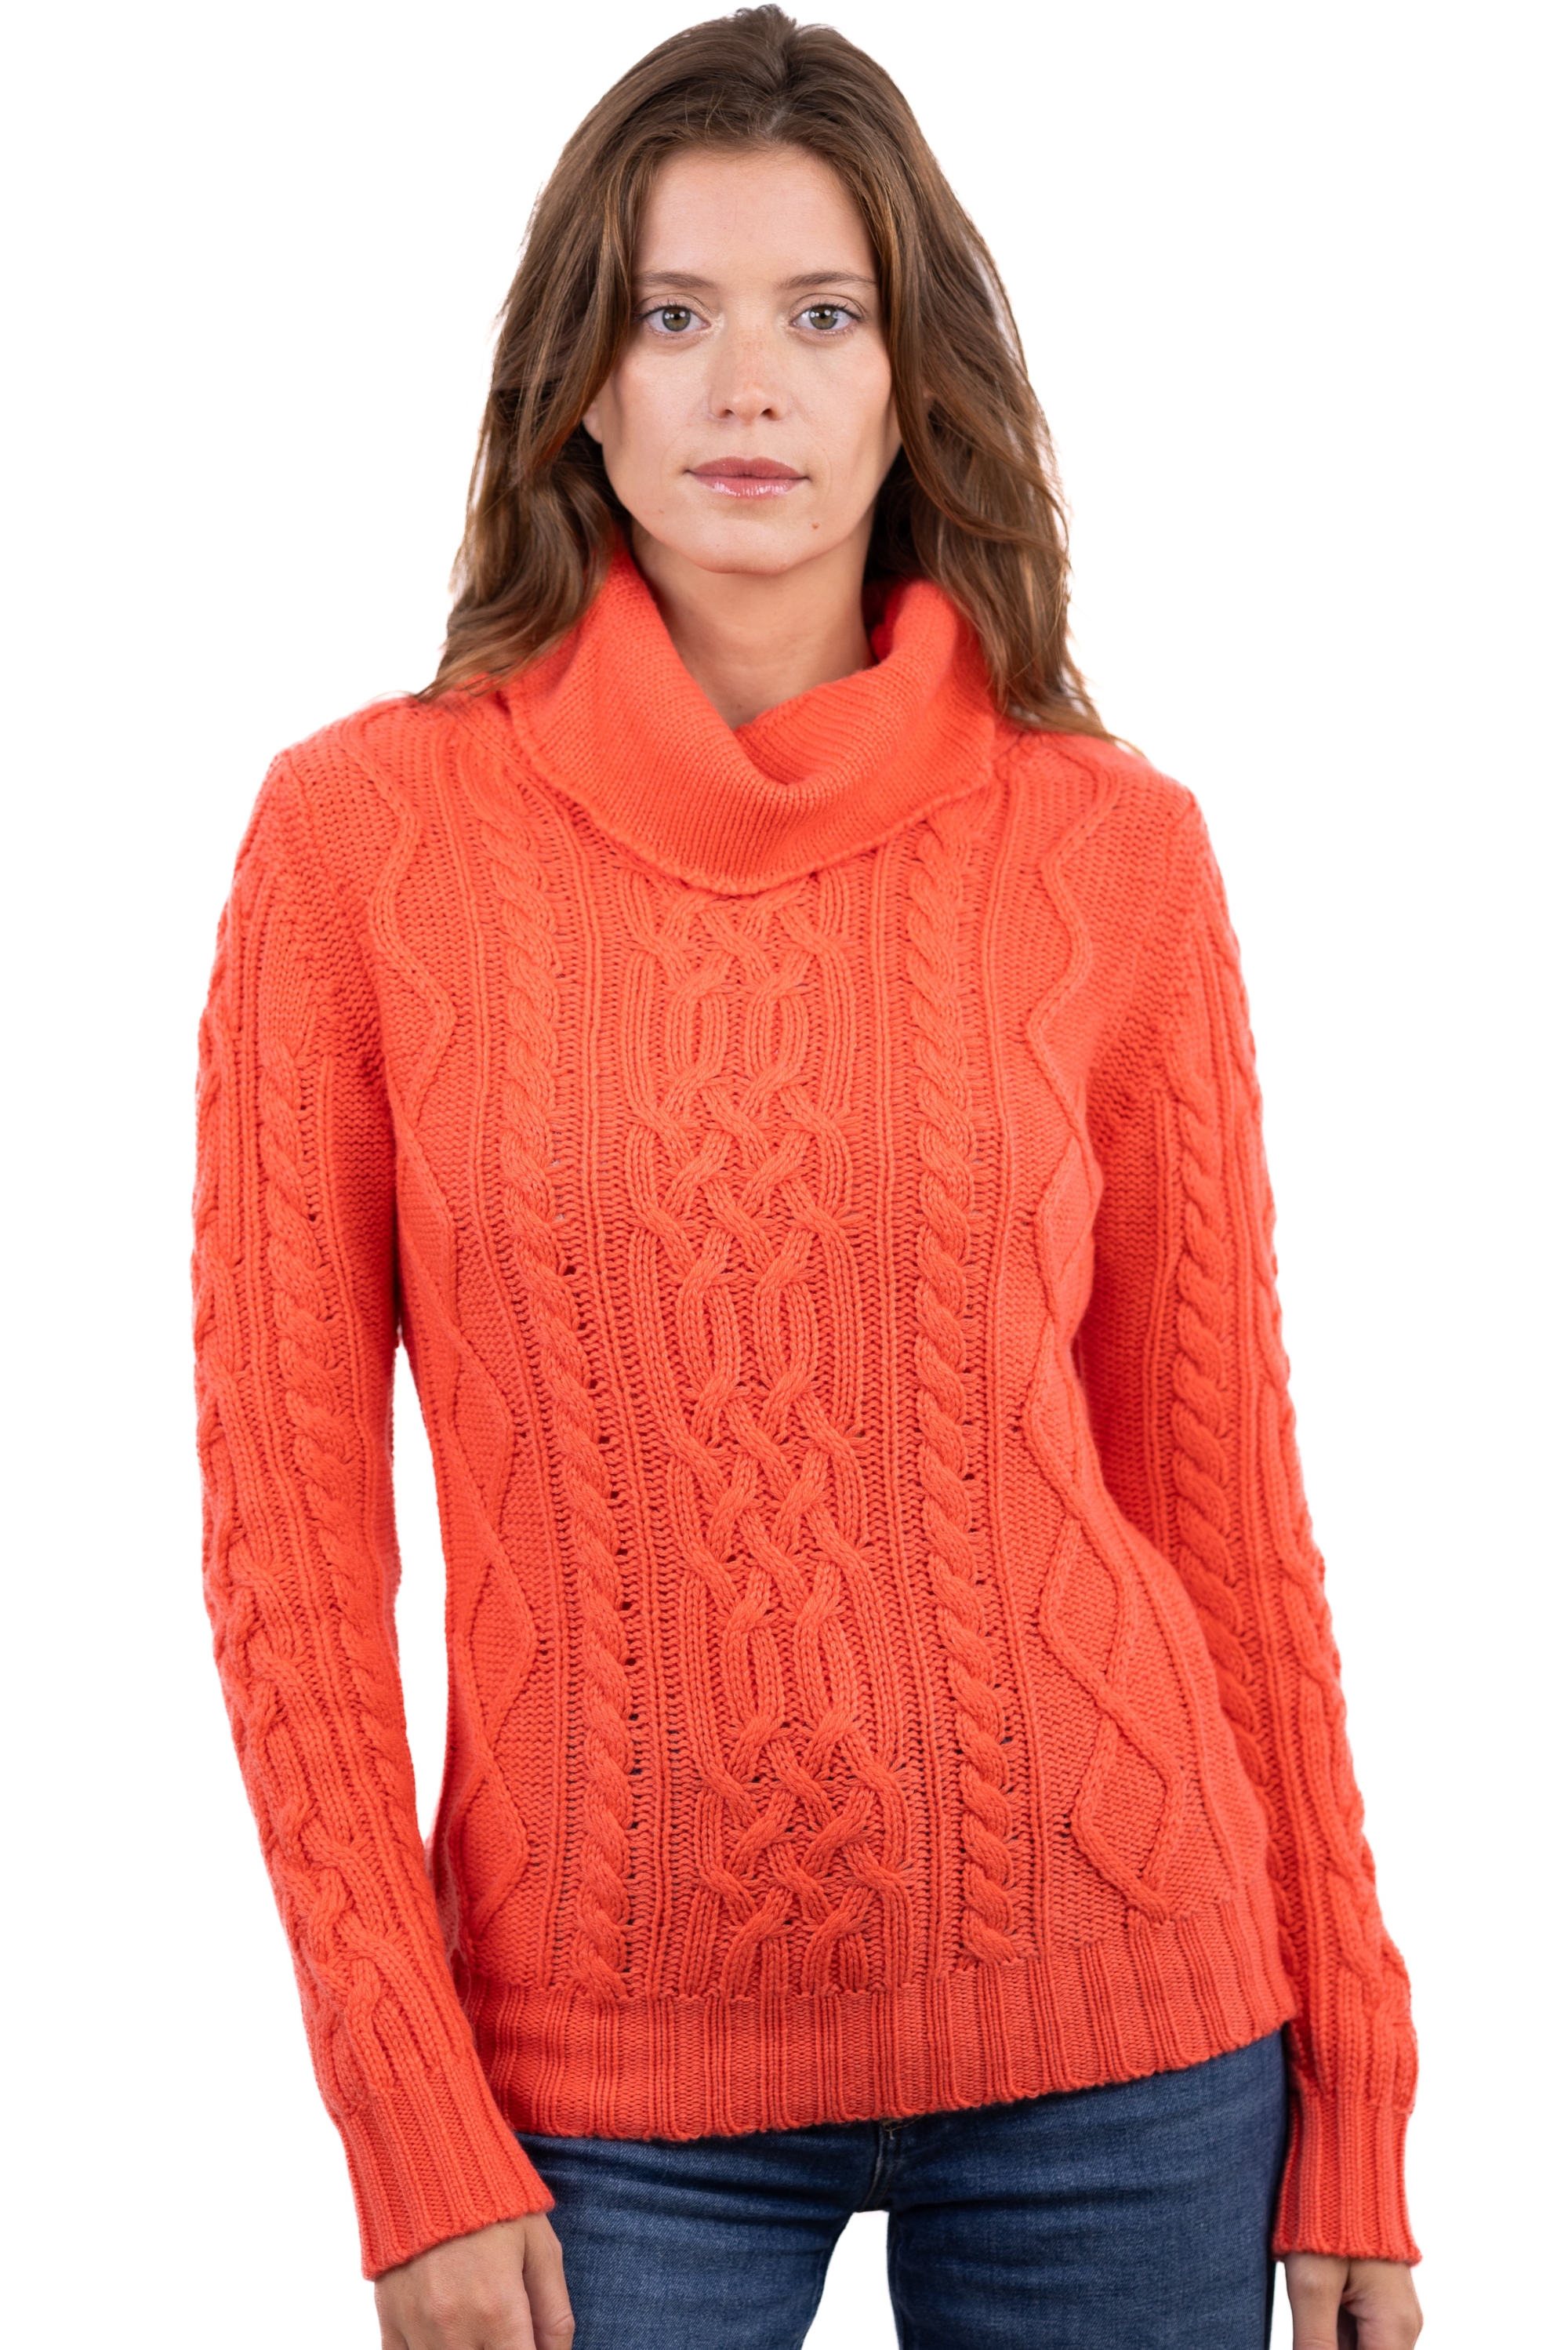 Cachemire pull femme col roule wynona corail lumineux 3xl